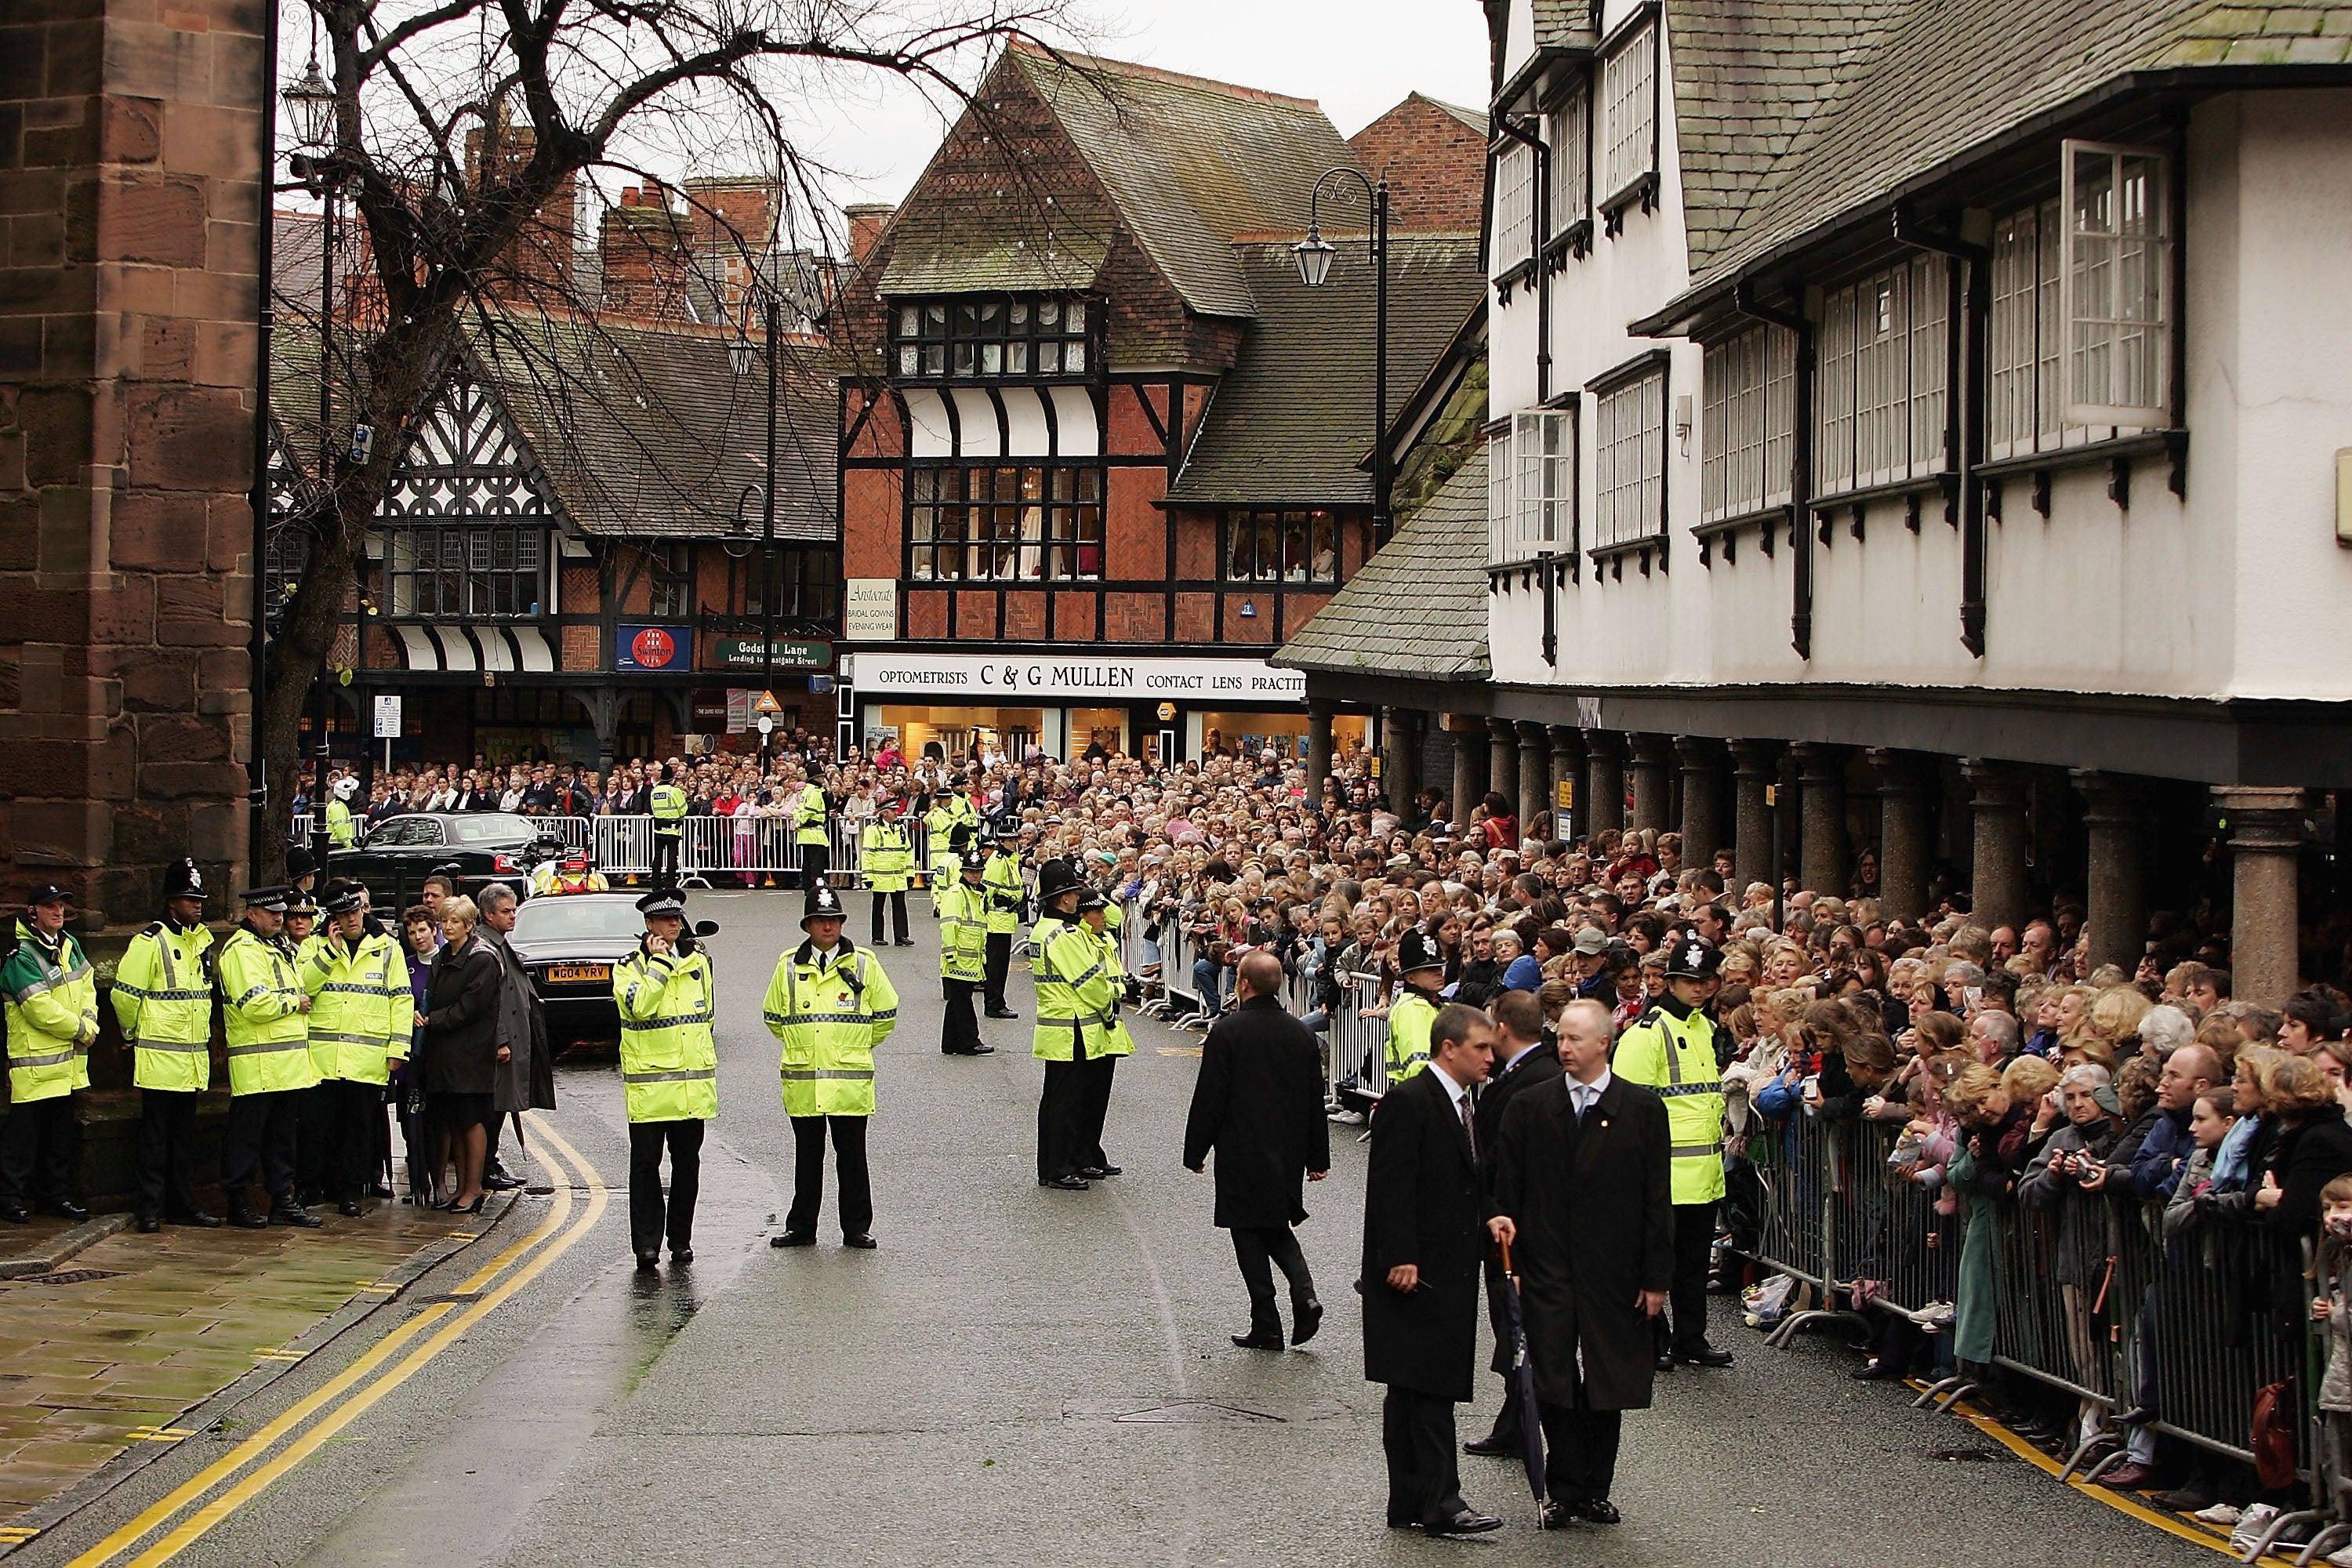 A large police presence is expected in Chester for the wedding.